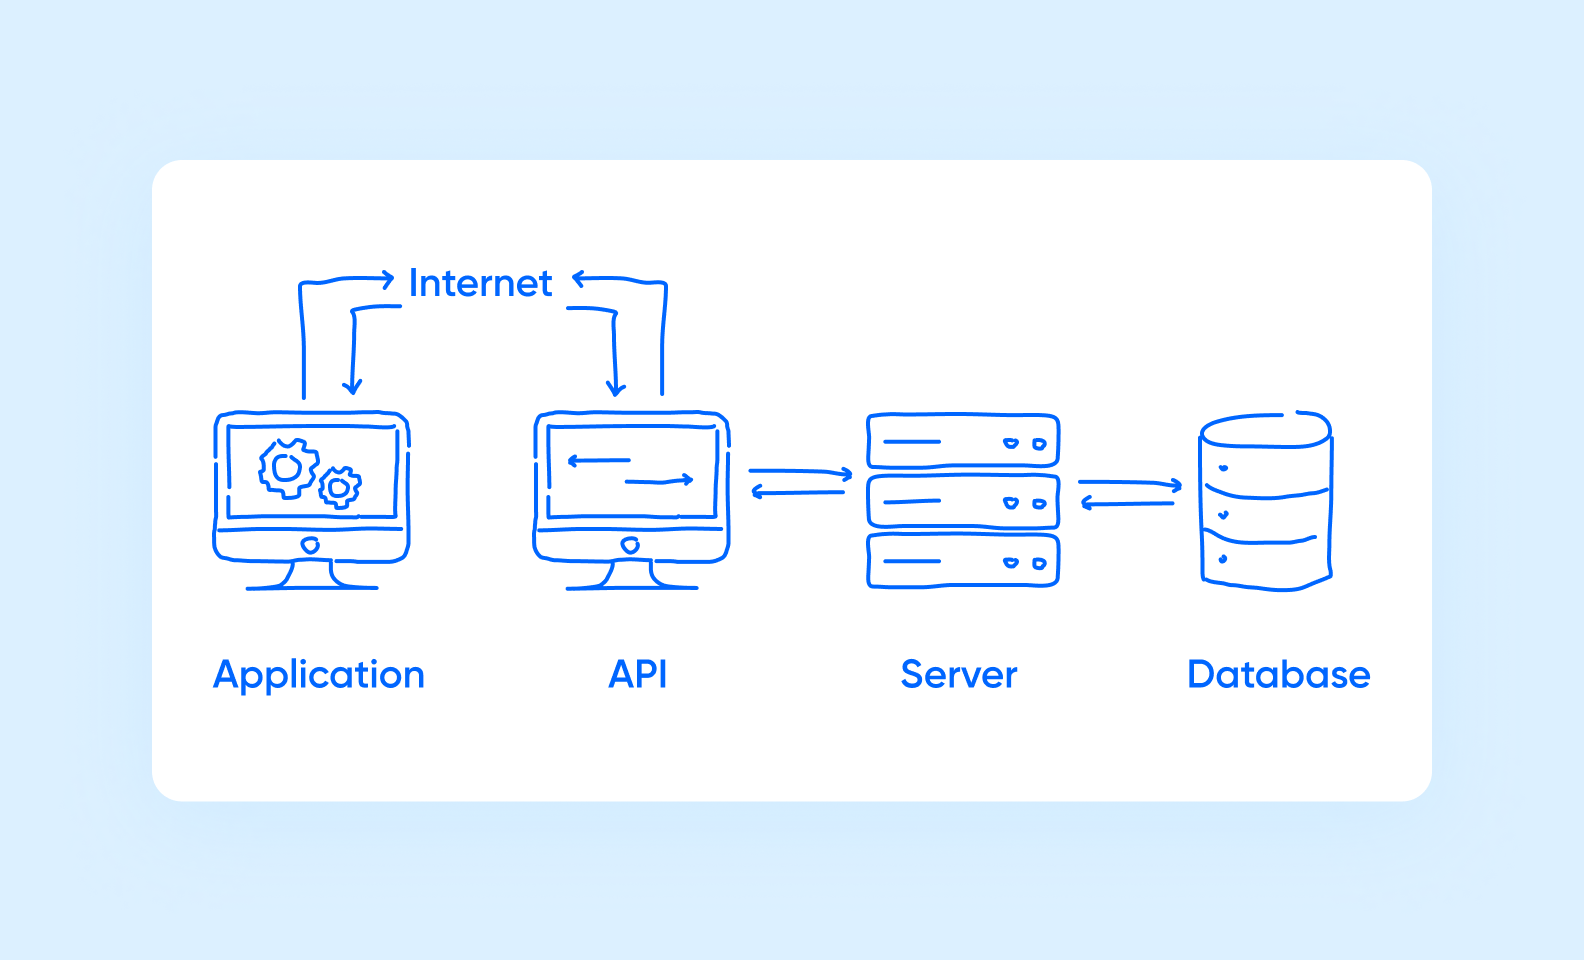 A scheme showing the basics of APIs